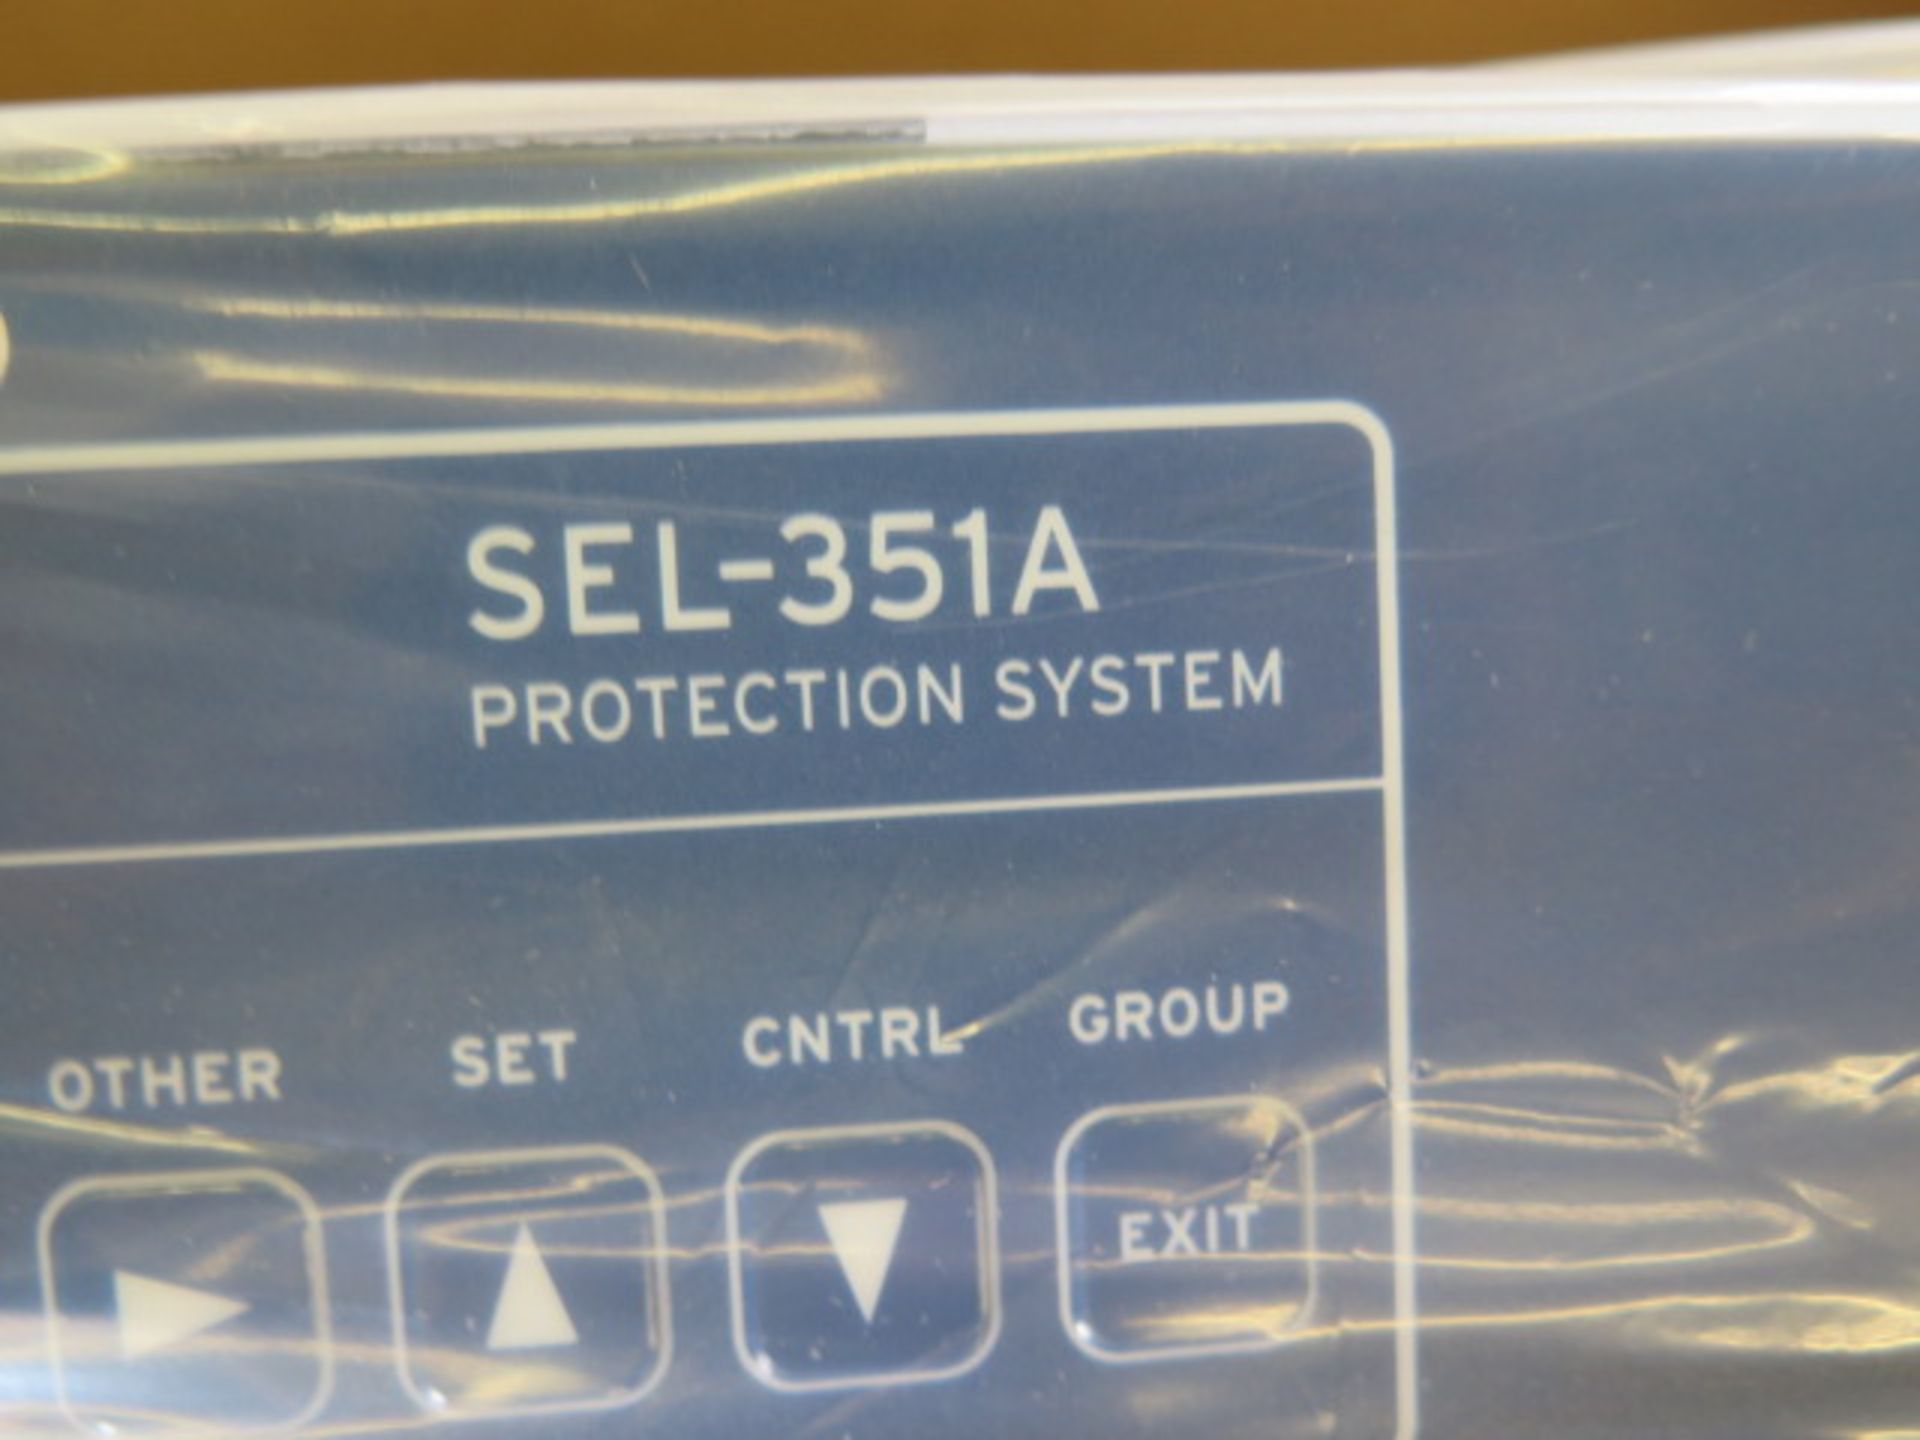 Schweitzer Engineering Laboratories mdl. SEL-351A Protection System - Image 3 of 3